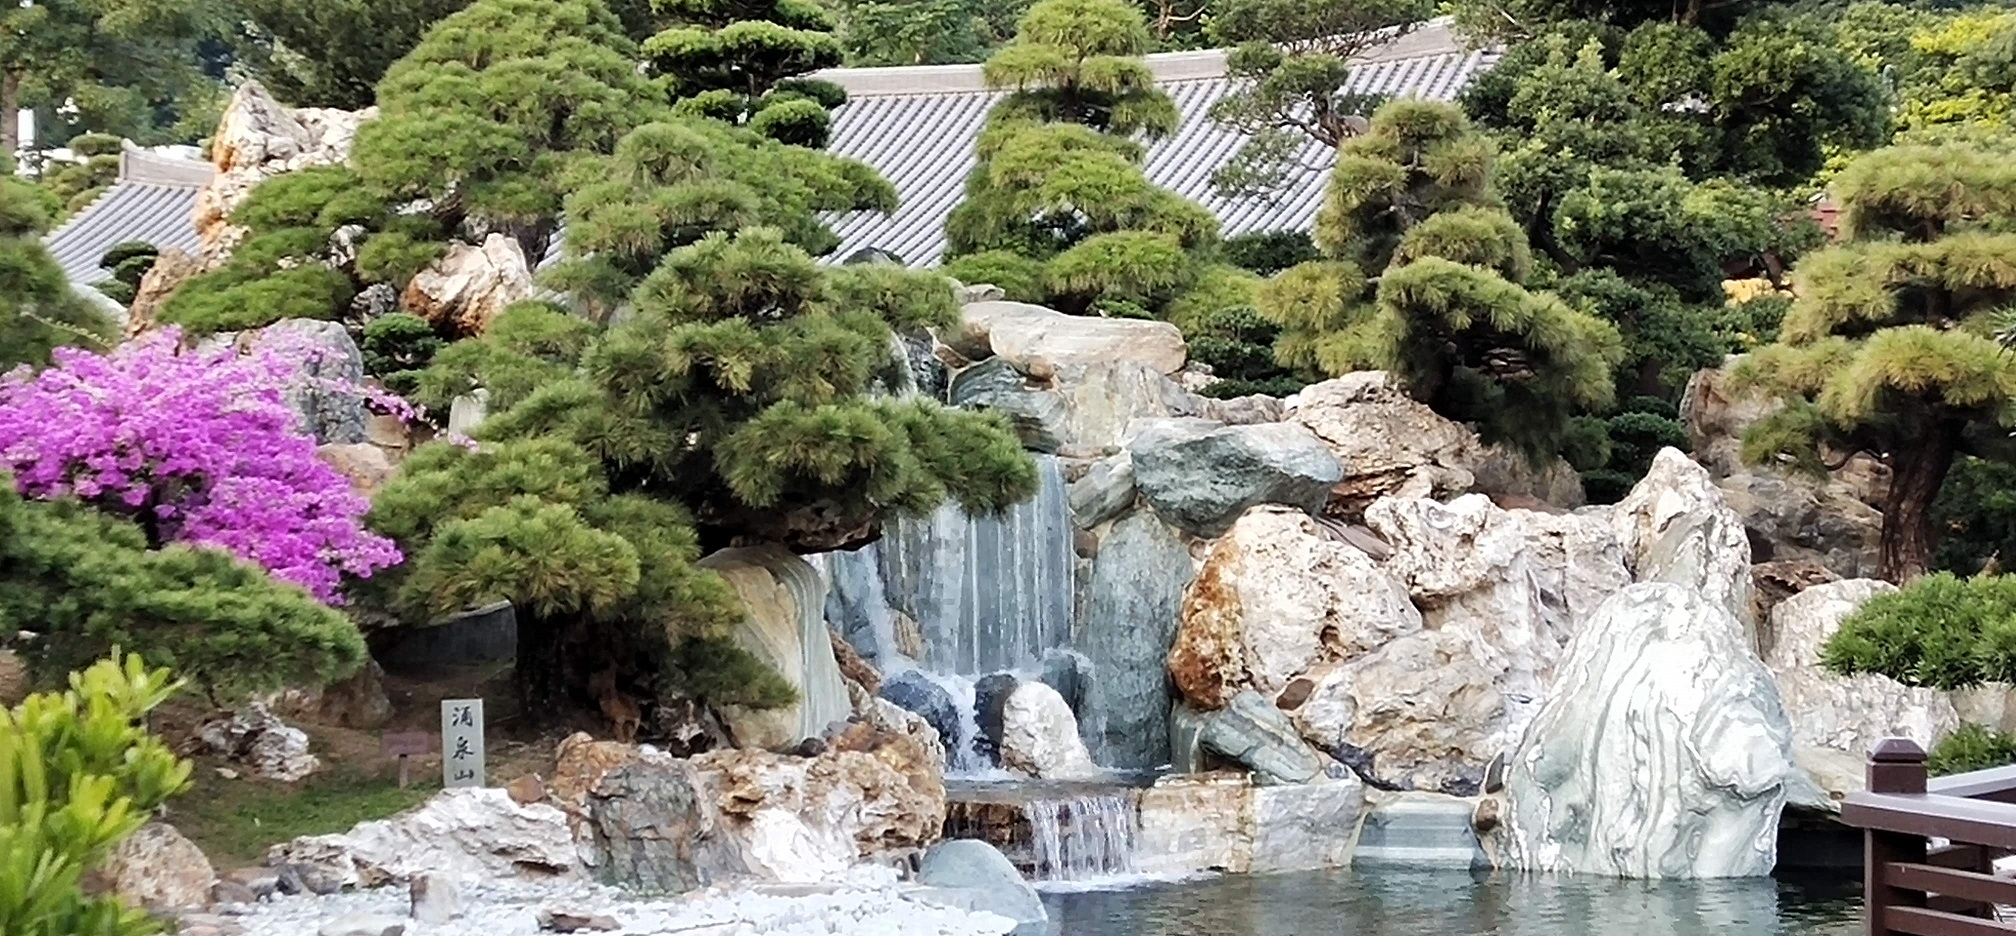 trees, rocks, small waterfall, wooden building